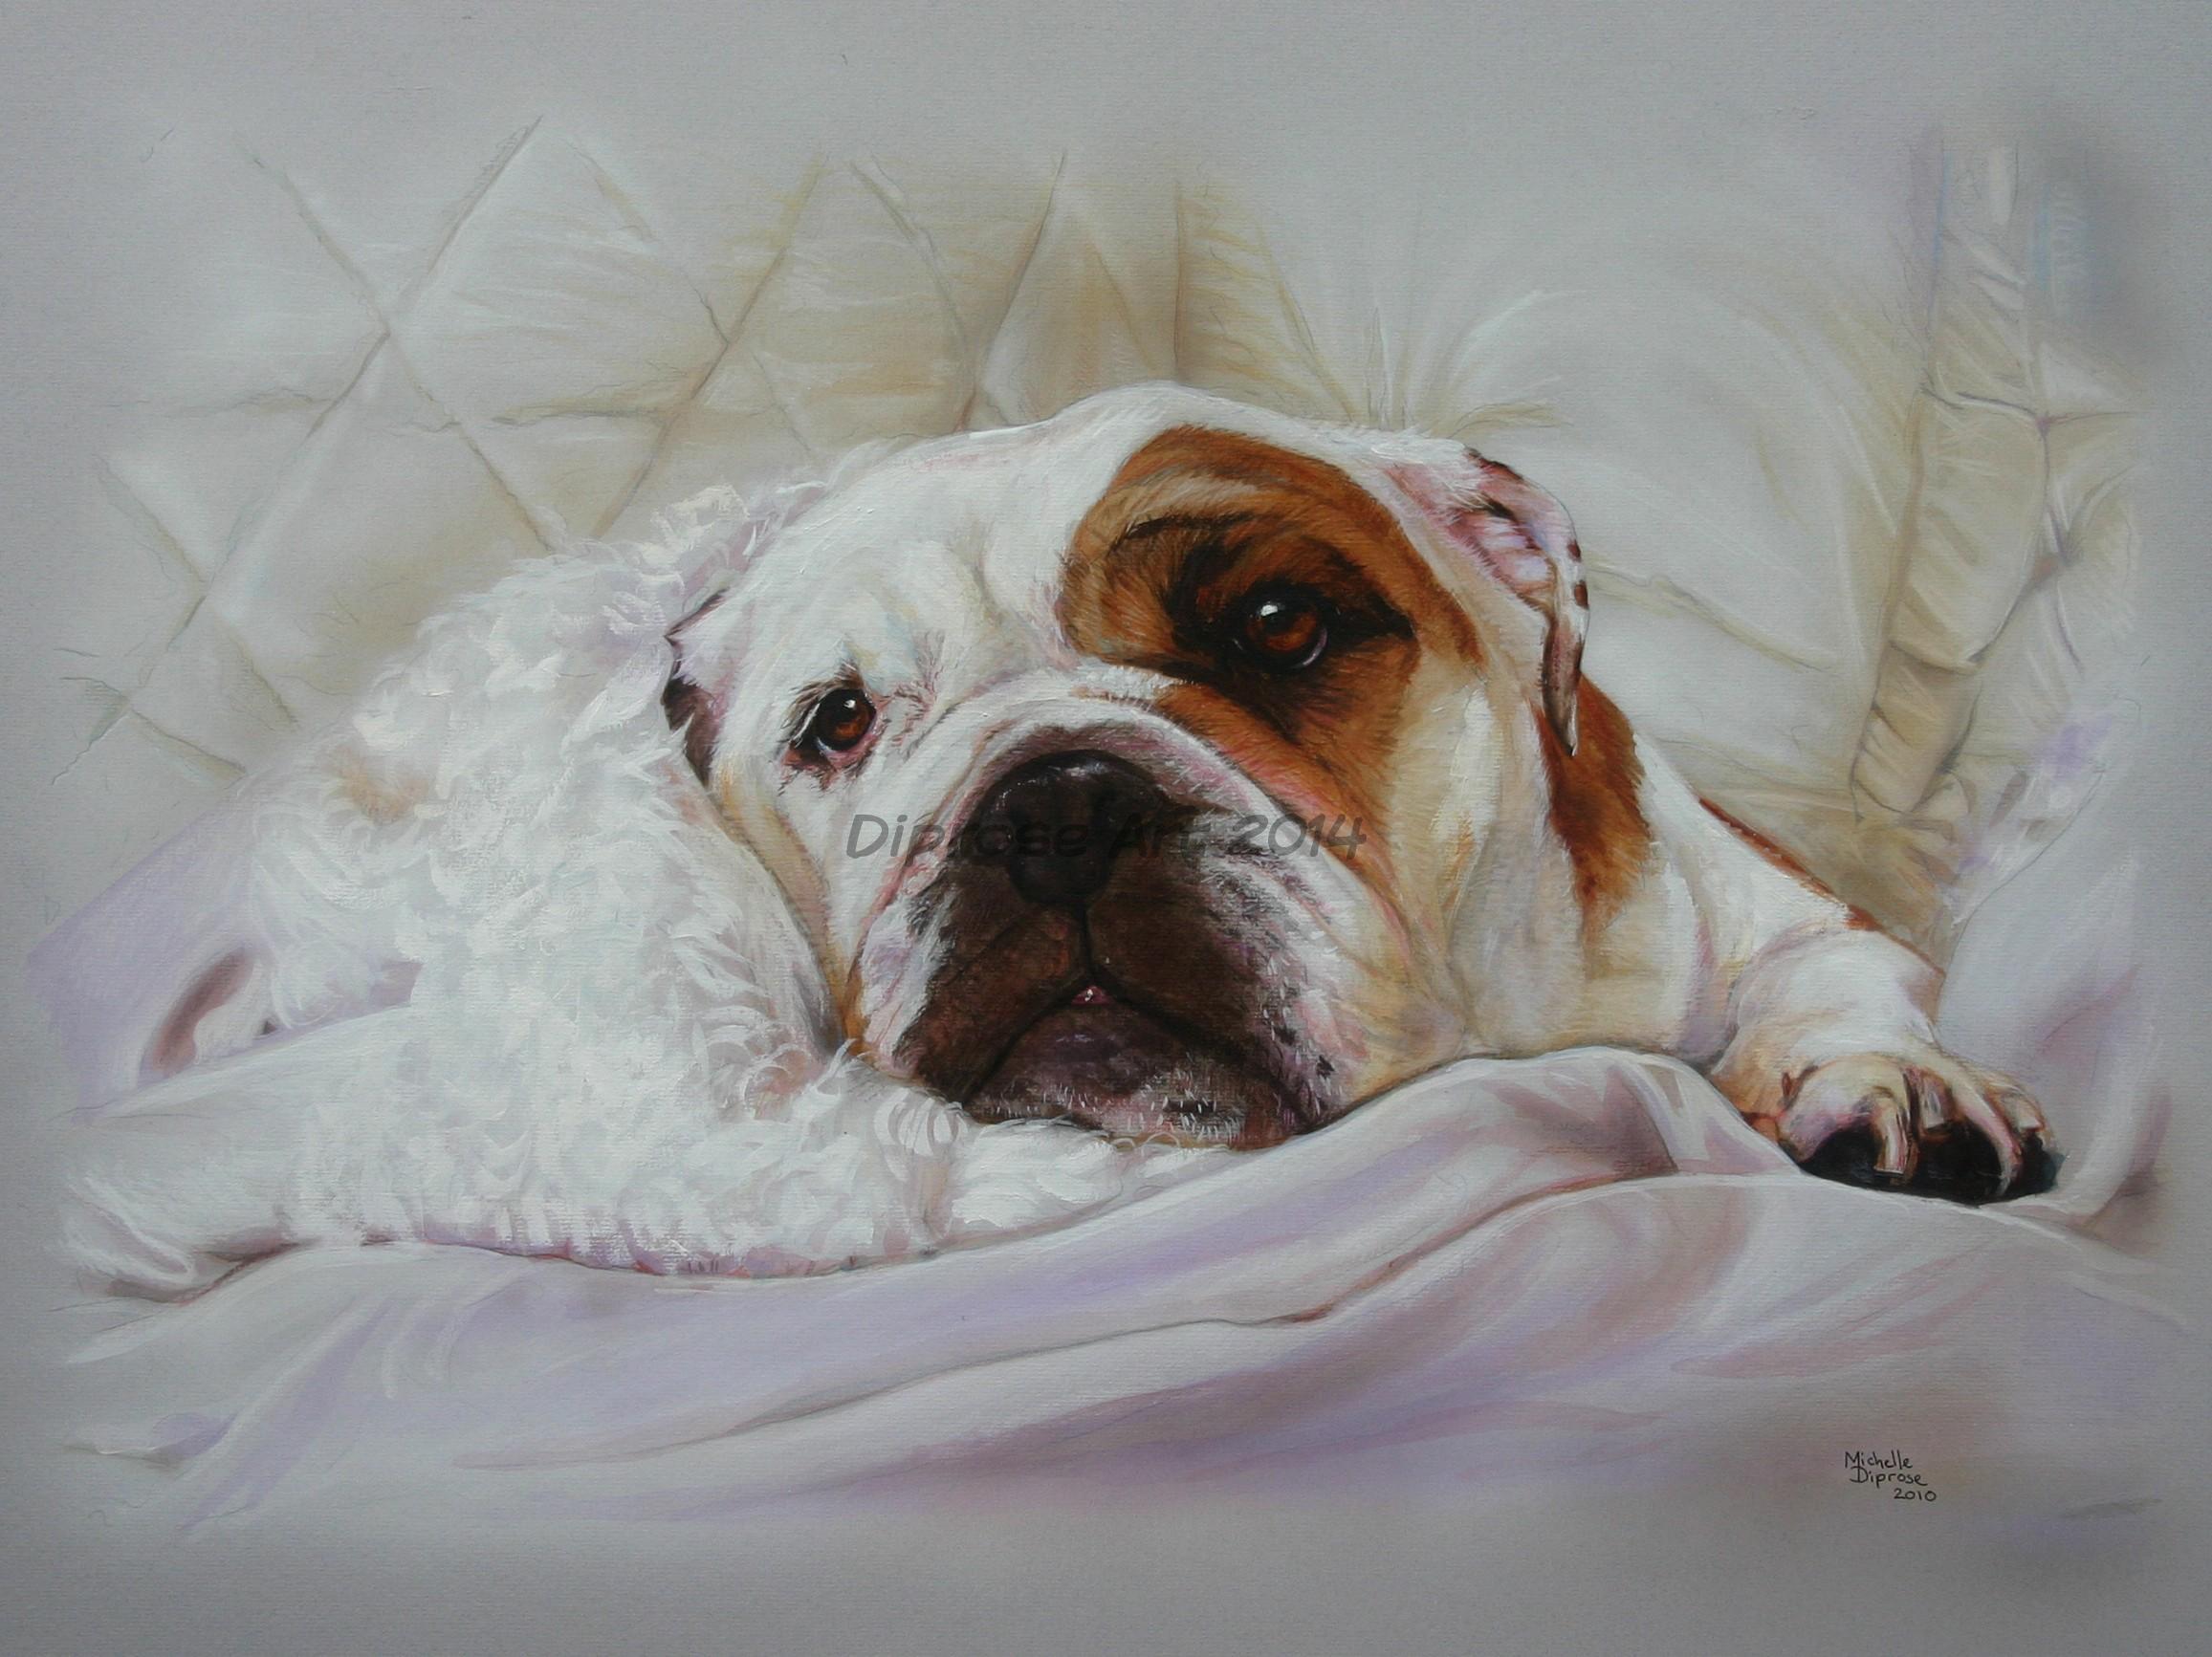 Acylics on board - approx A1 - pet dog portrait - Rosie the bulldog snuggled in her favourite blanket.